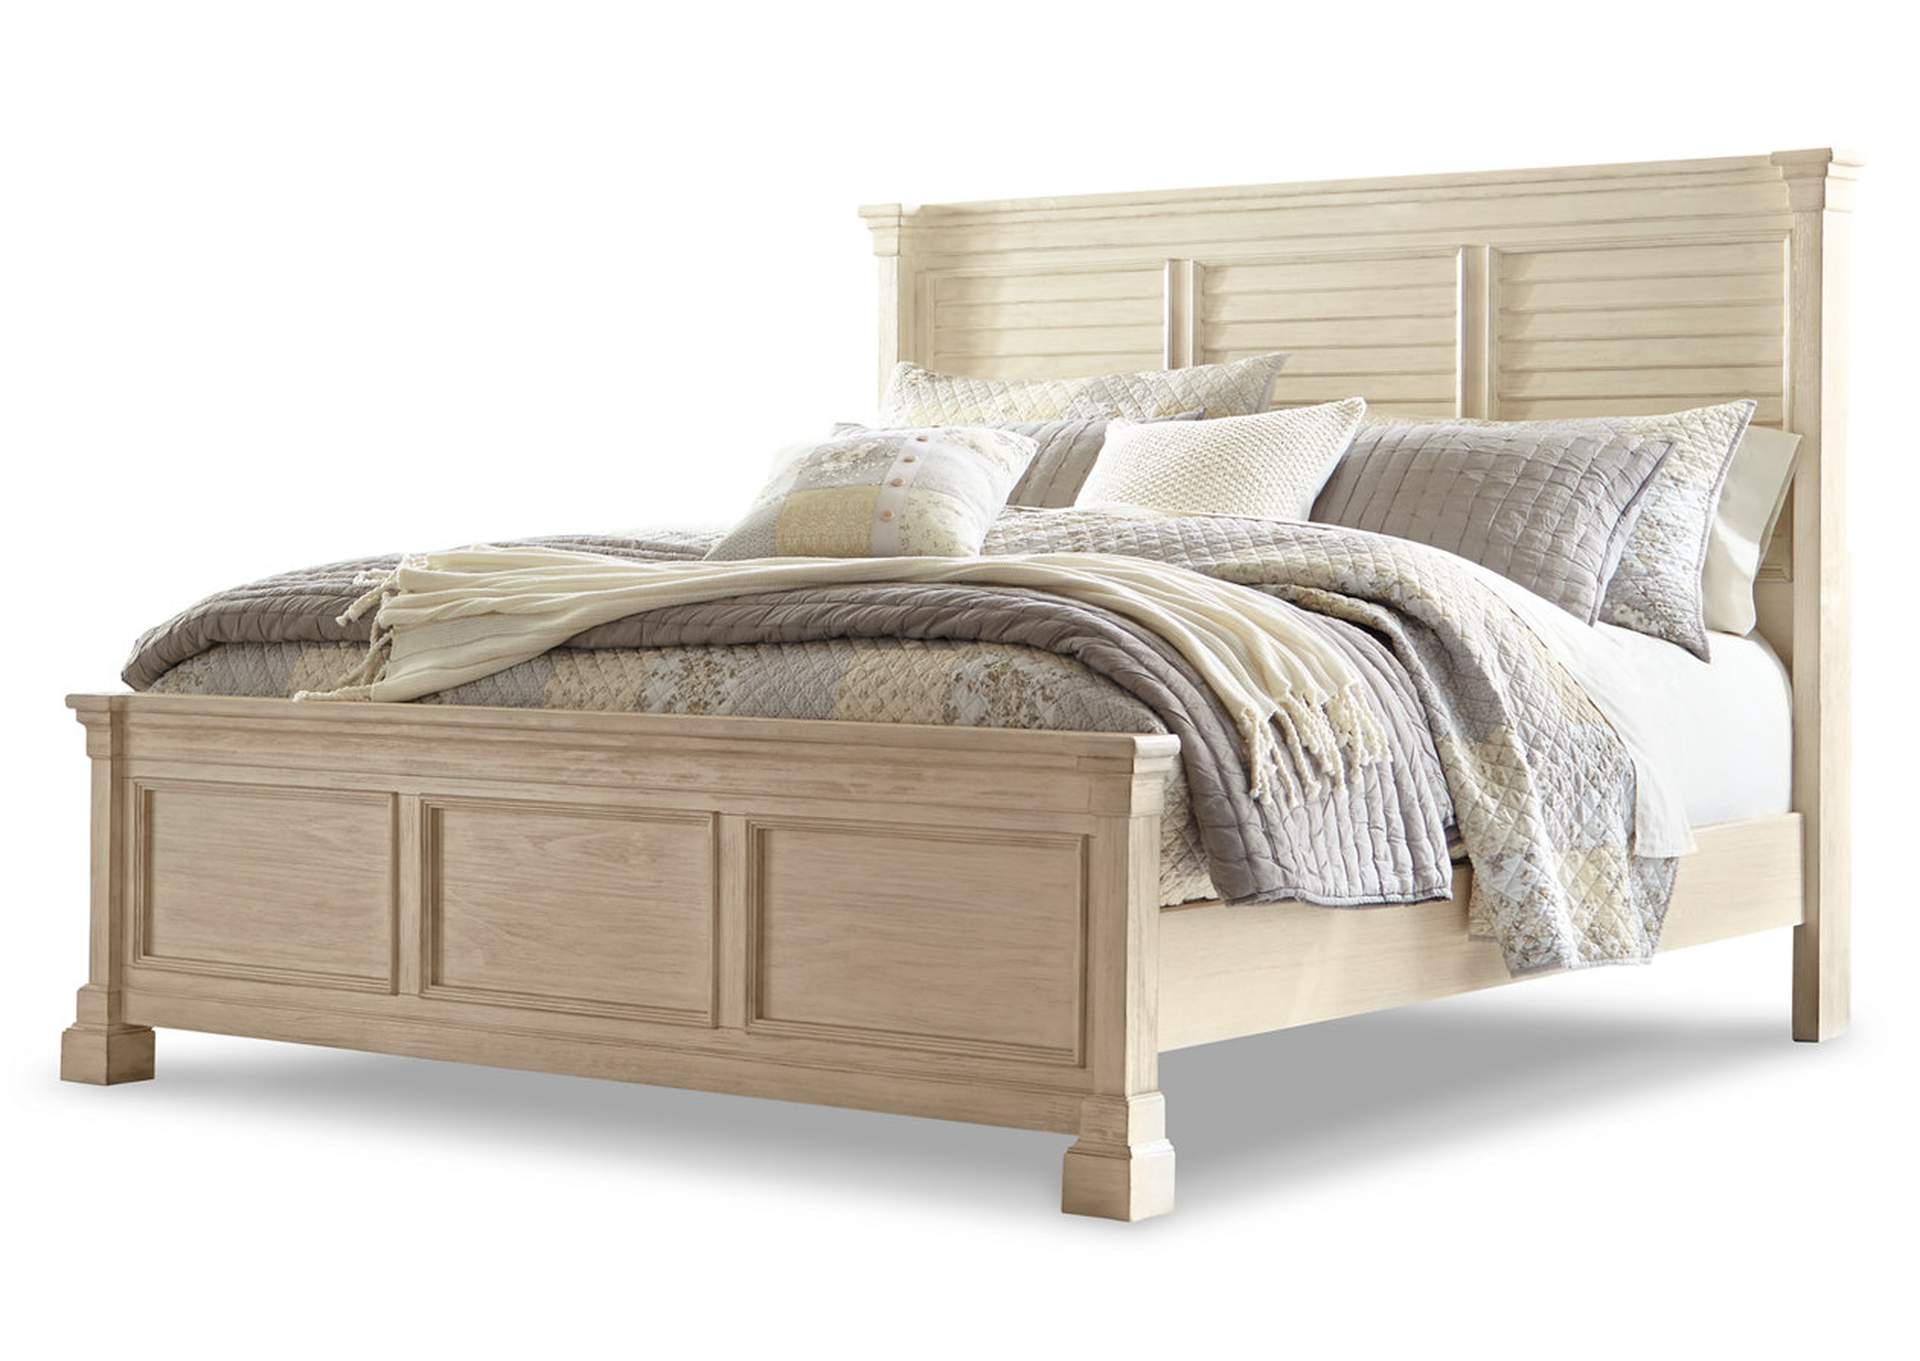 Bolanburg California King Panel Bed, Dresser and Mirror,Signature Design By Ashley